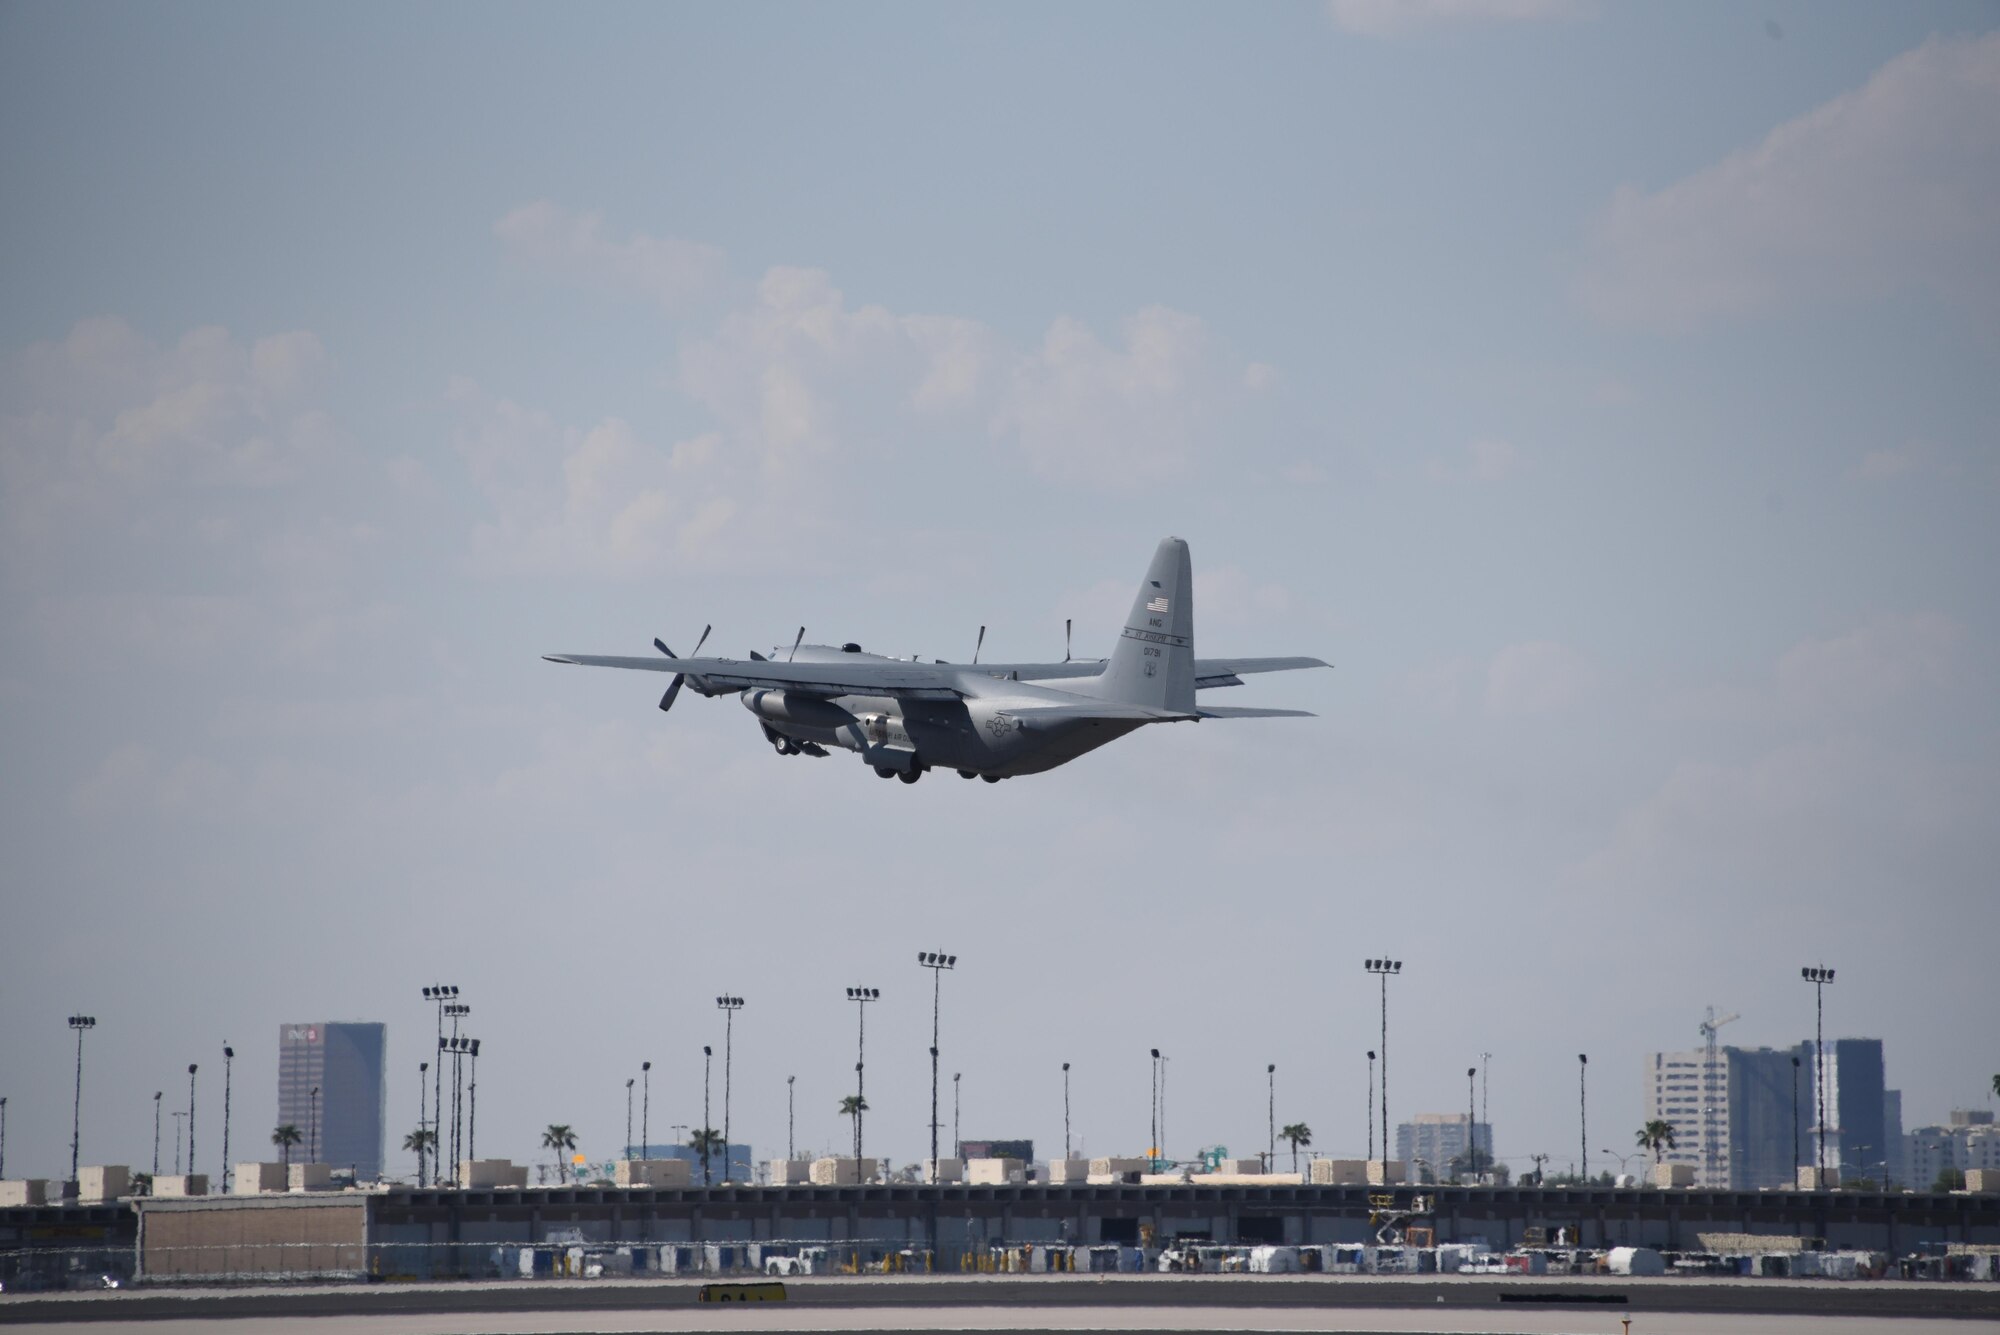 A C-130 Hercules aircraft assigned to the Missouri Air National Guard’s 139th Airlift Wing in St. Joseph, Missouri, takes off from Sky Harbor International Airport, Phoenix, Ariz., on Sept. 12, 2017. Airmen with the 161st Air Refueling Wing logistics readiness squadron, small air terminal, deployed to the U.S. Virgin Islands to provide support in response to the aftermath of Hurricane Irma on Sept. 12, 2017. (U.S. Air National Guard photo by Master Sgt. Kelly Deitloff)